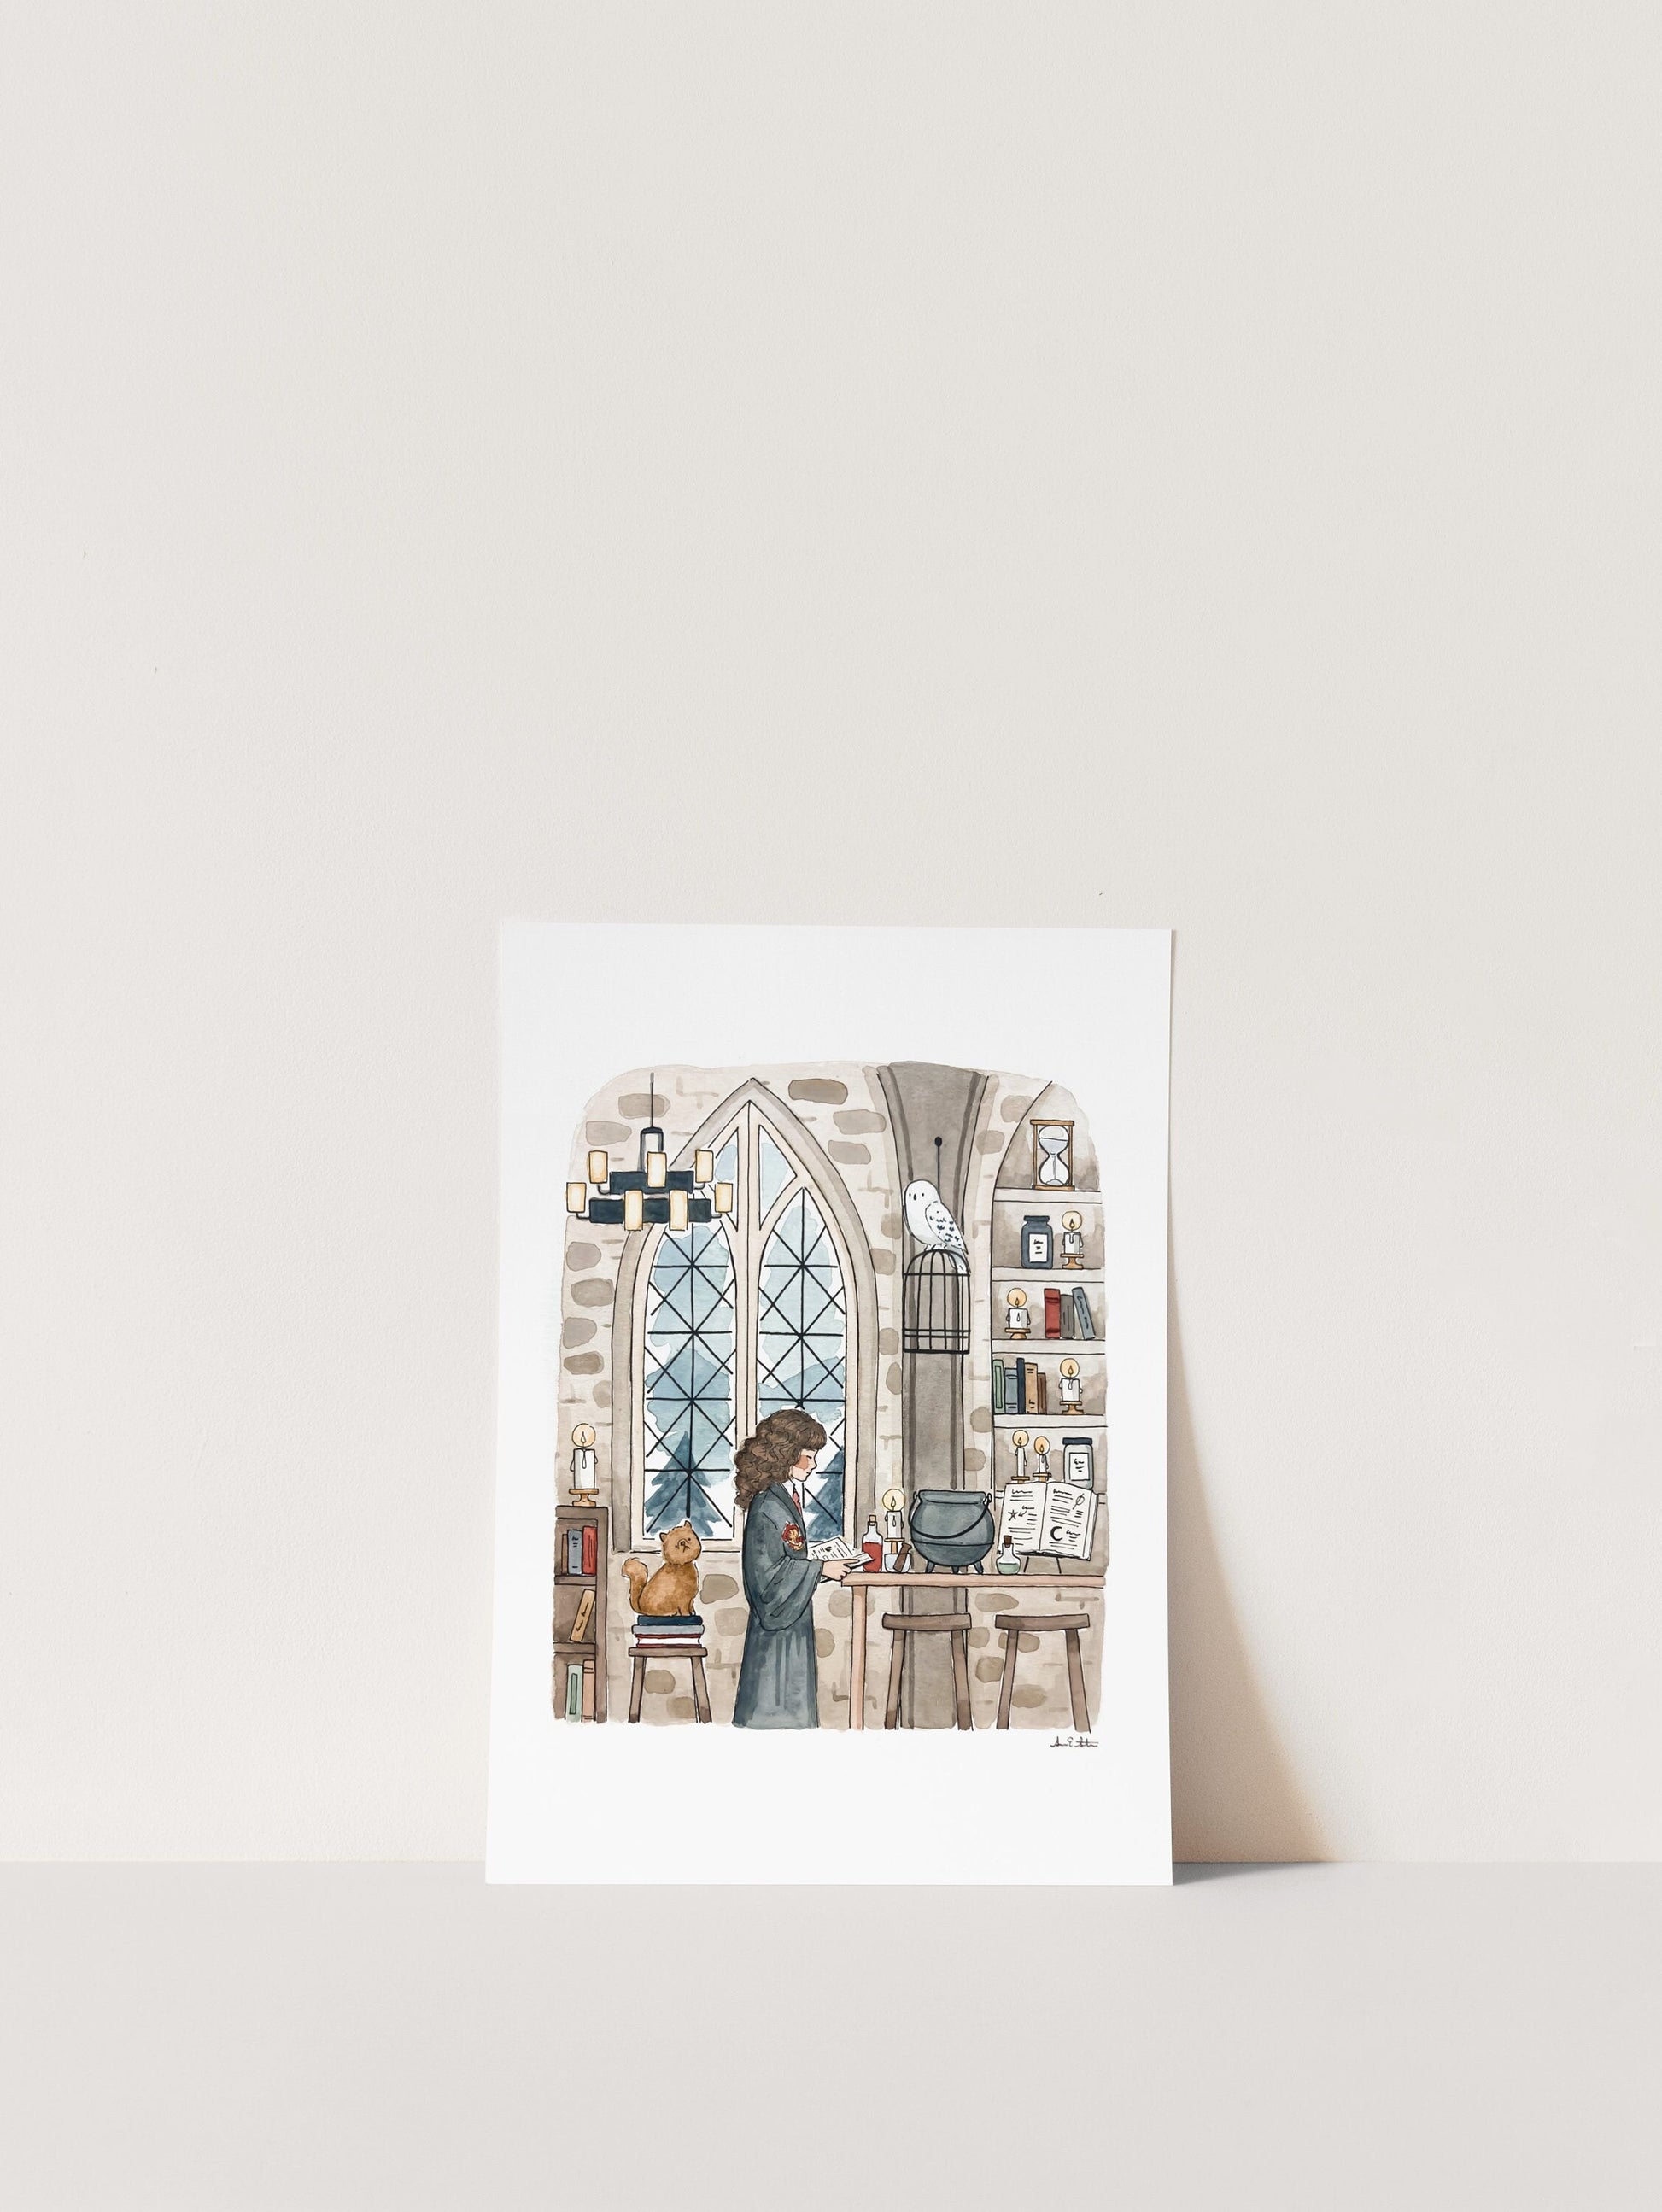 Wizard Print | Watercolor Illustration | Wall Art | 8x10" 5x7" Archival Art Print | Book Lover Gift